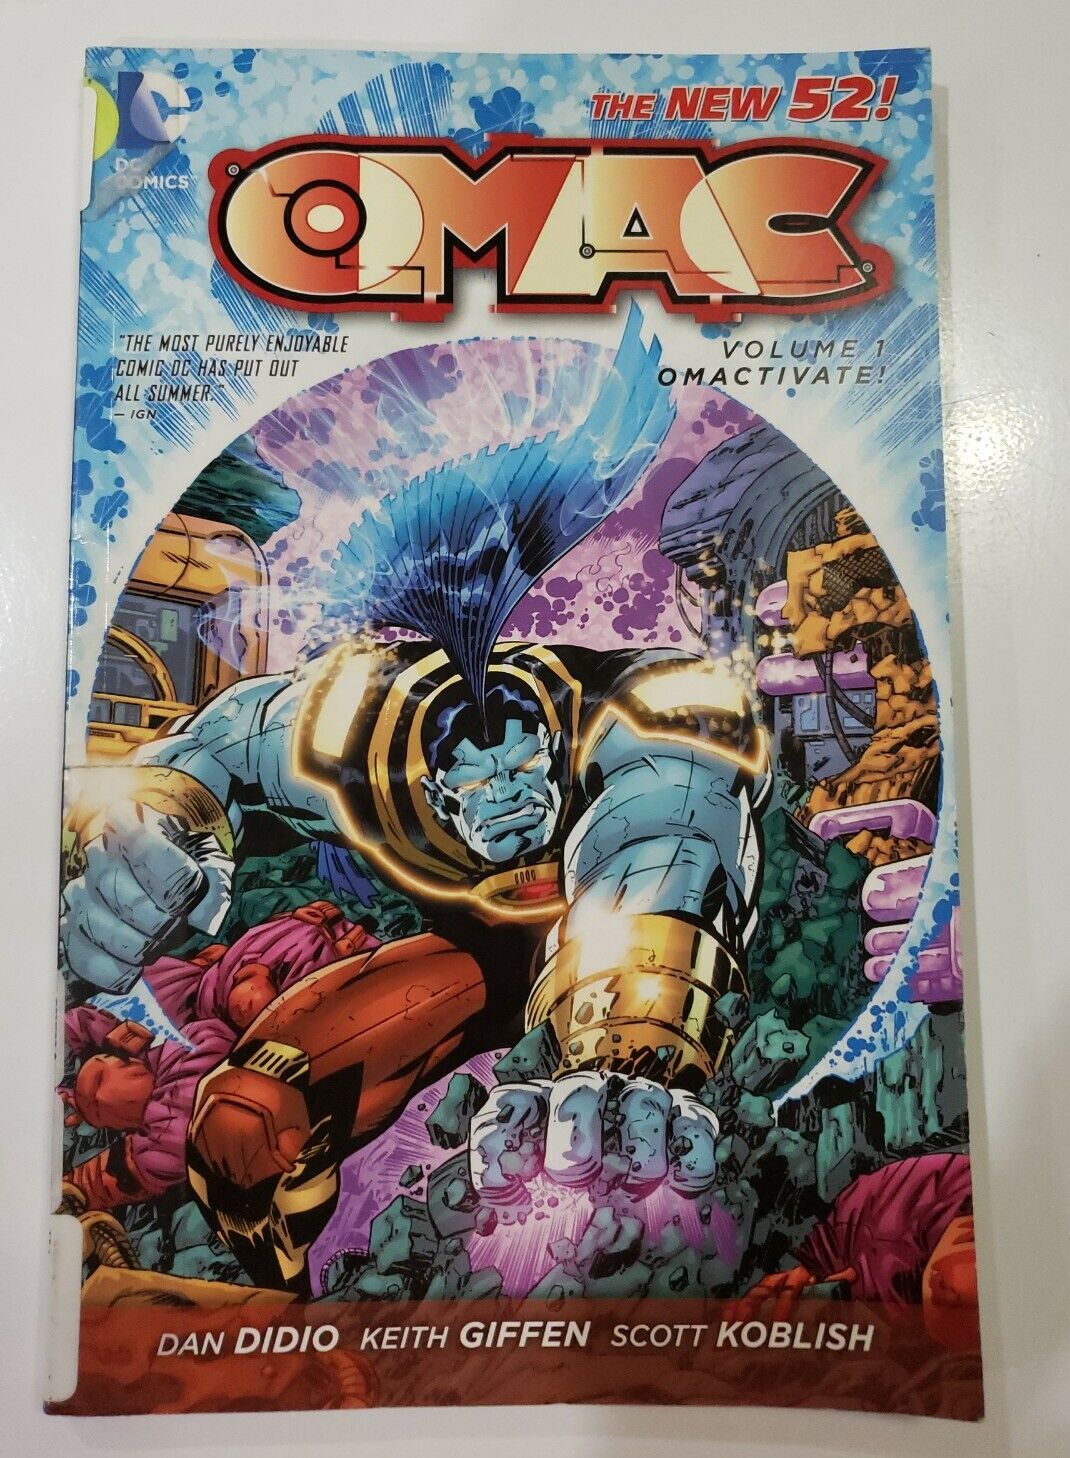 O. M. A. C. Vol. 1: Omactivate (the New 52) by Keith Giffen and Dan DiDio (2012